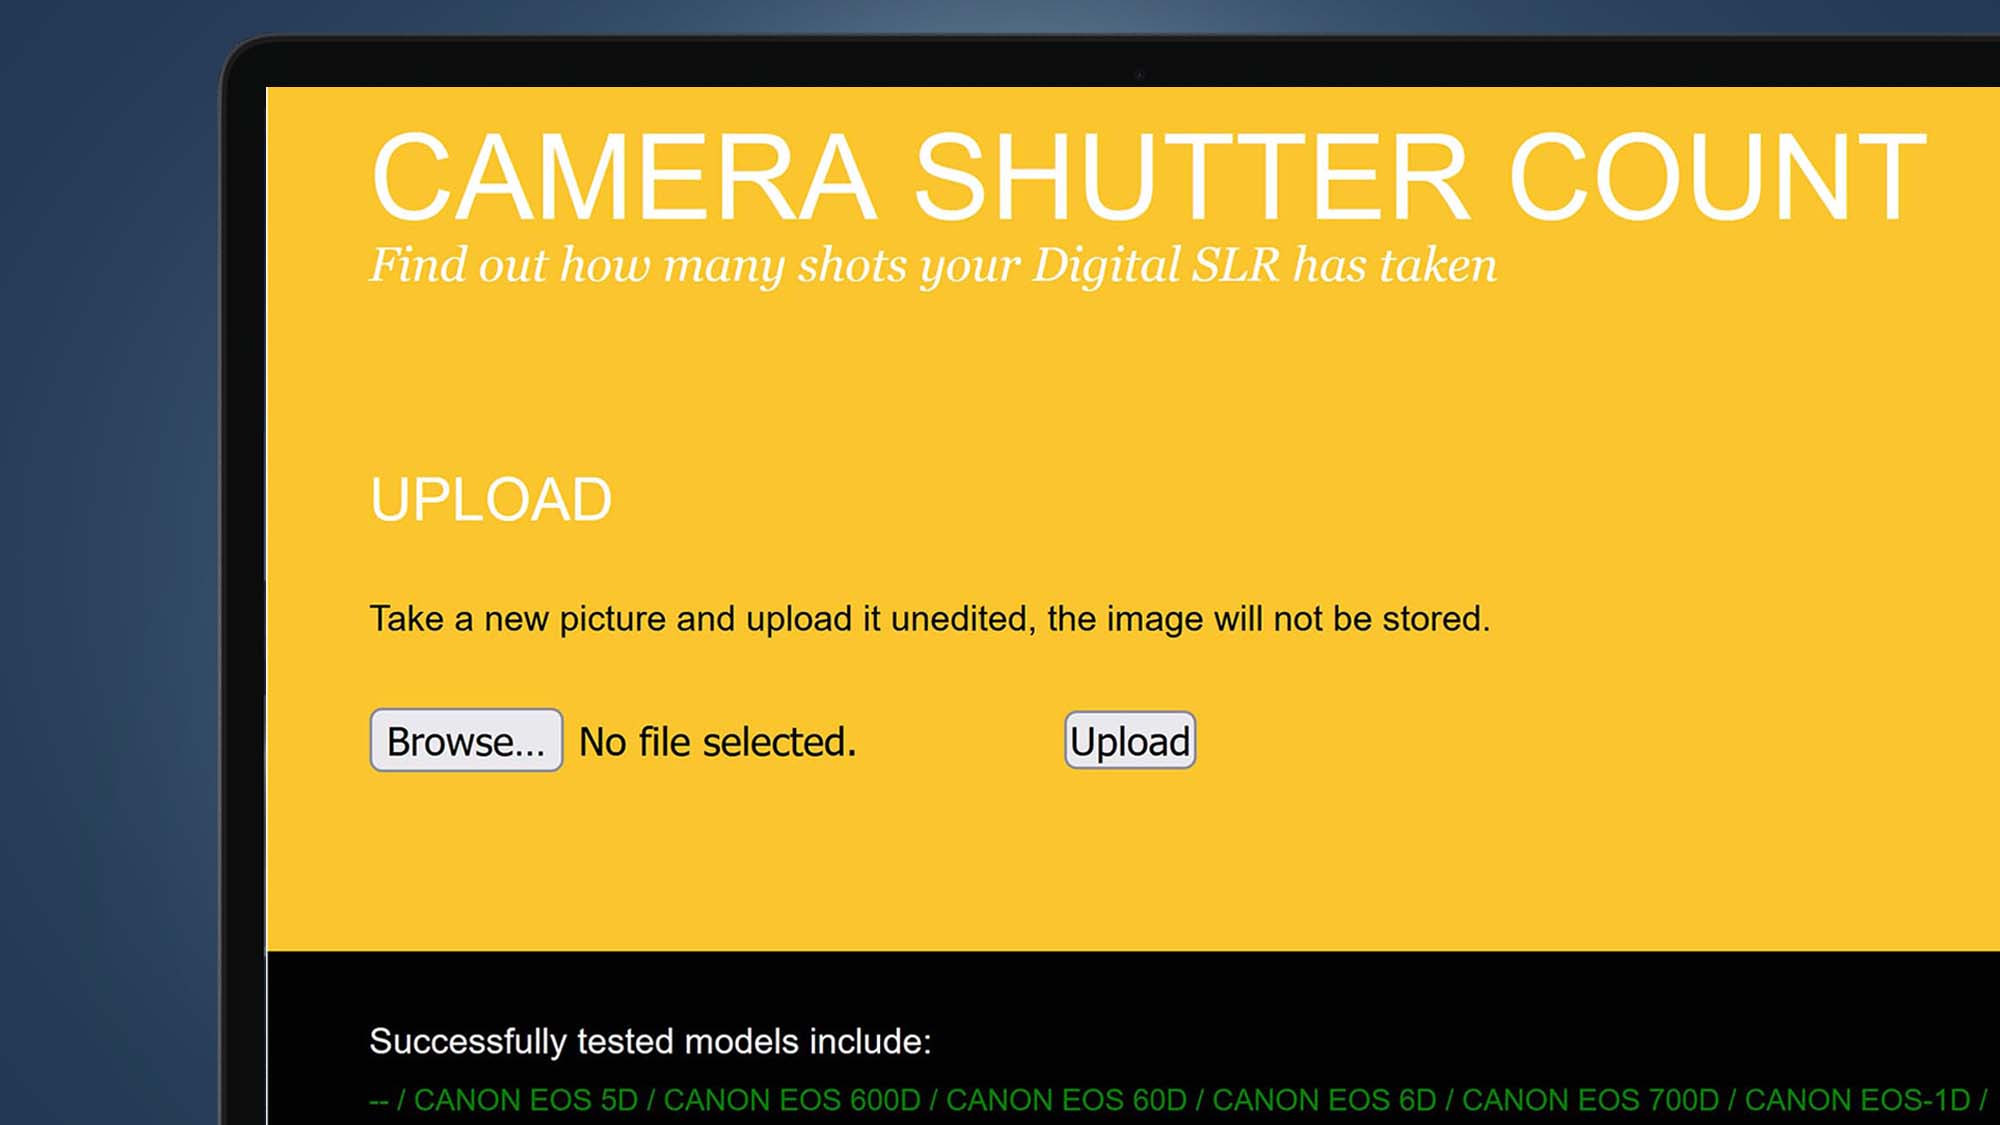 A laptop screen showing the Camera Shutter count website